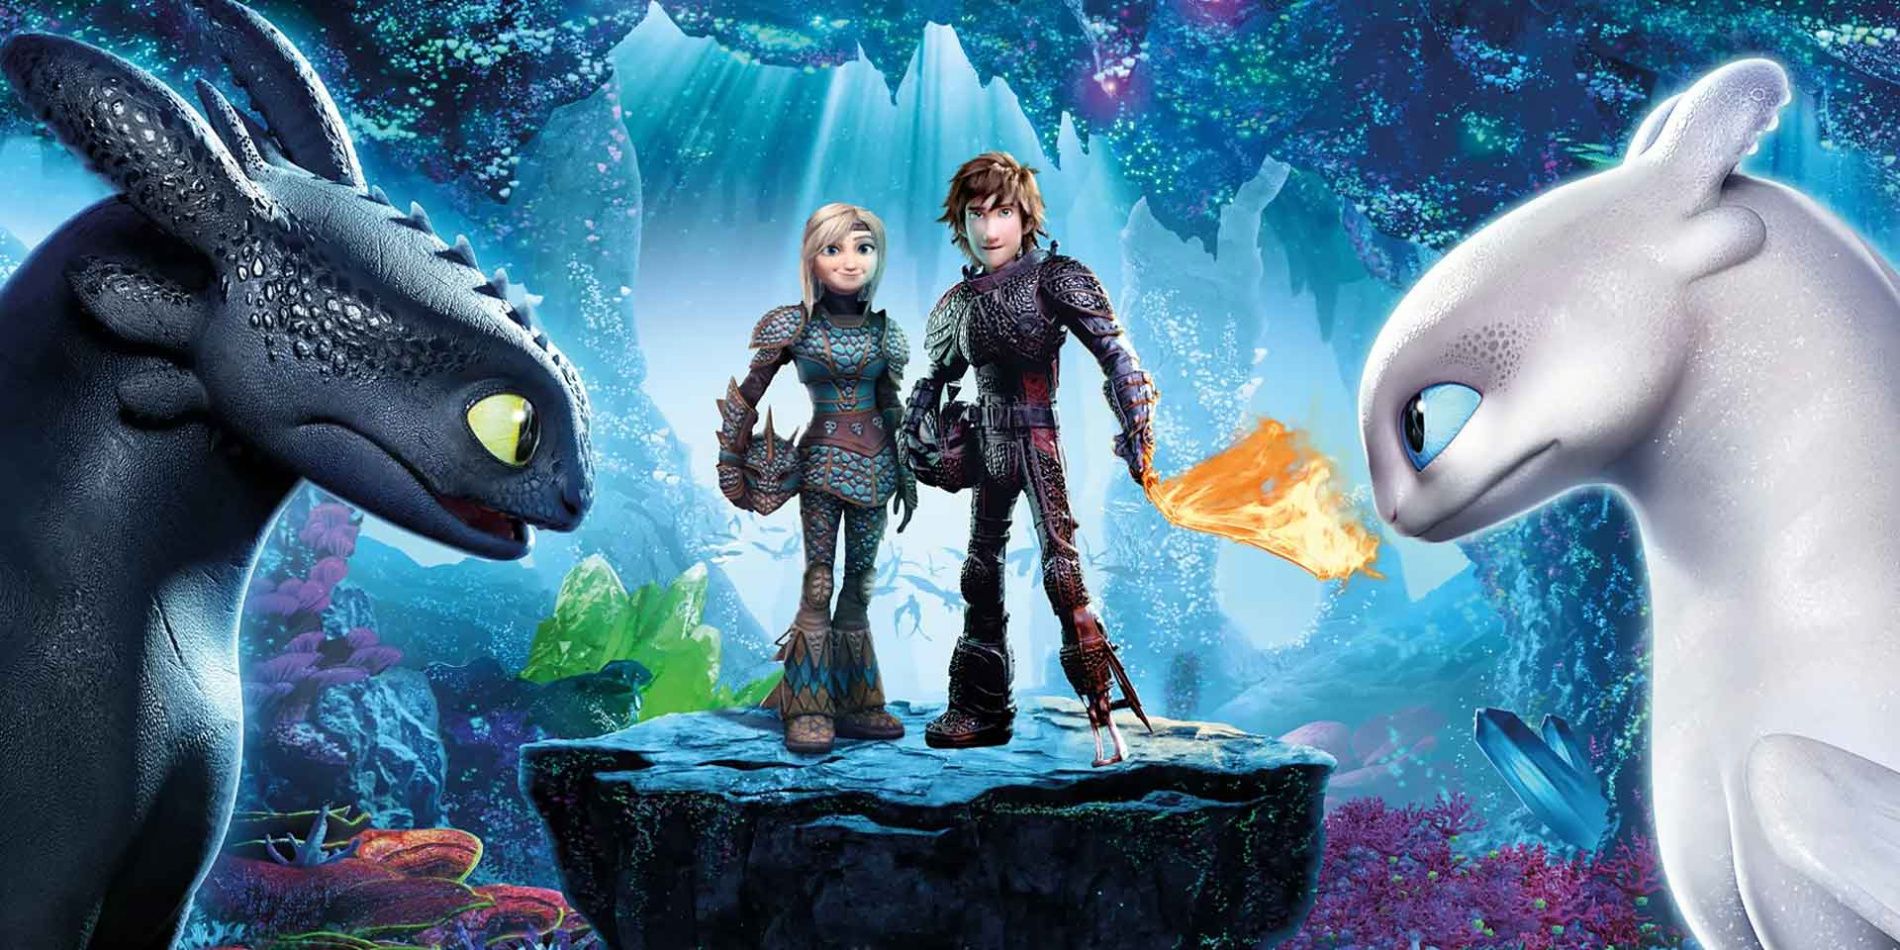 How to Train Your Dragon 3's Villain is Downright Disturbing